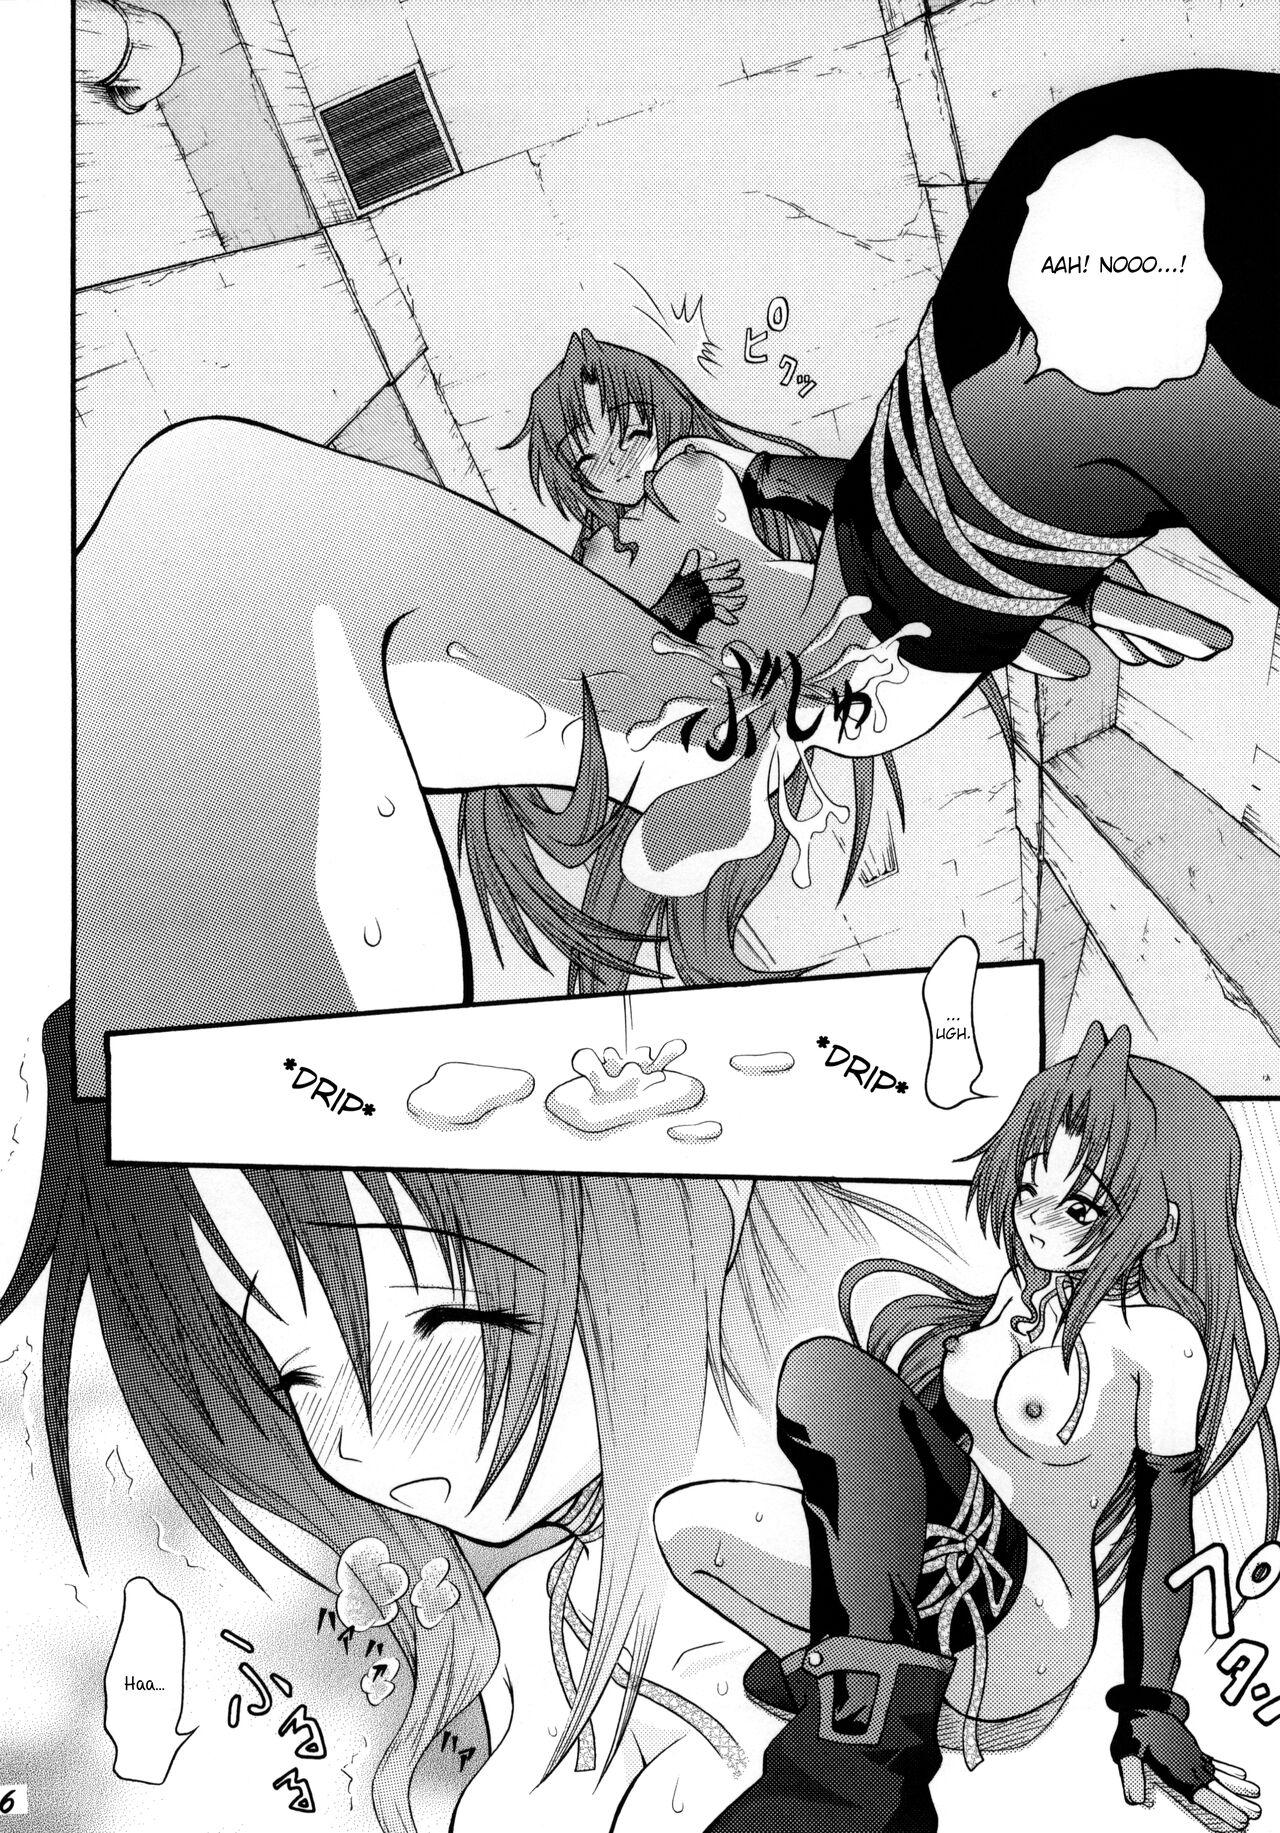 Yanks Featured Anna Toko mo Konna Toko mo Elegant♪ | Both Places Like That and Places Like This Are Elegant♪ - Kiddy grade Best Blow Job - Page 5